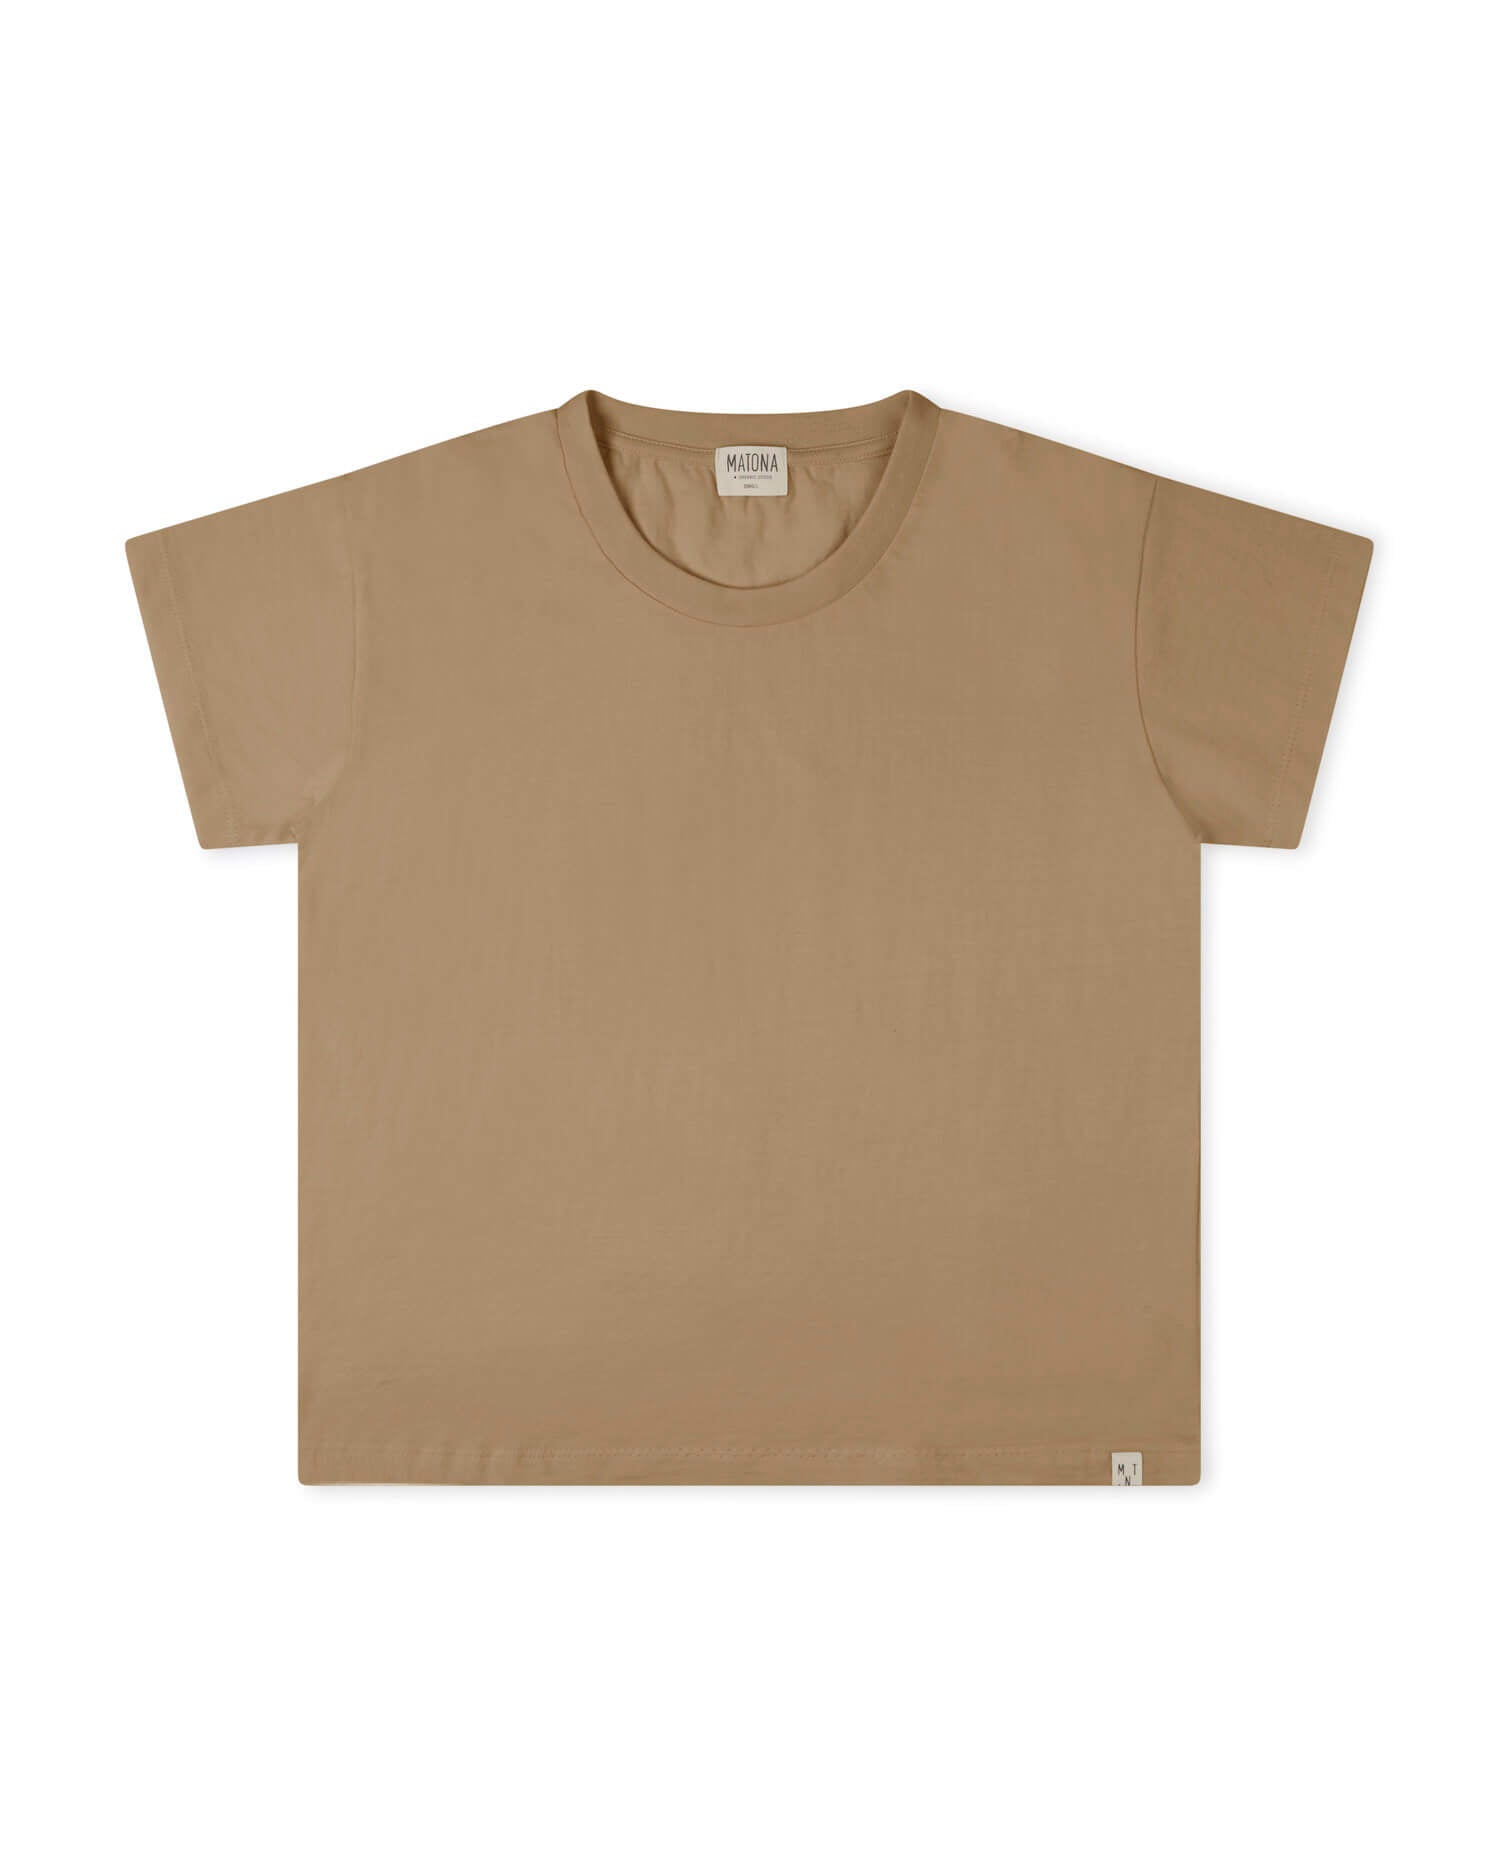 Light brown Essential T-shirt made from 100% organic cotton from Matona